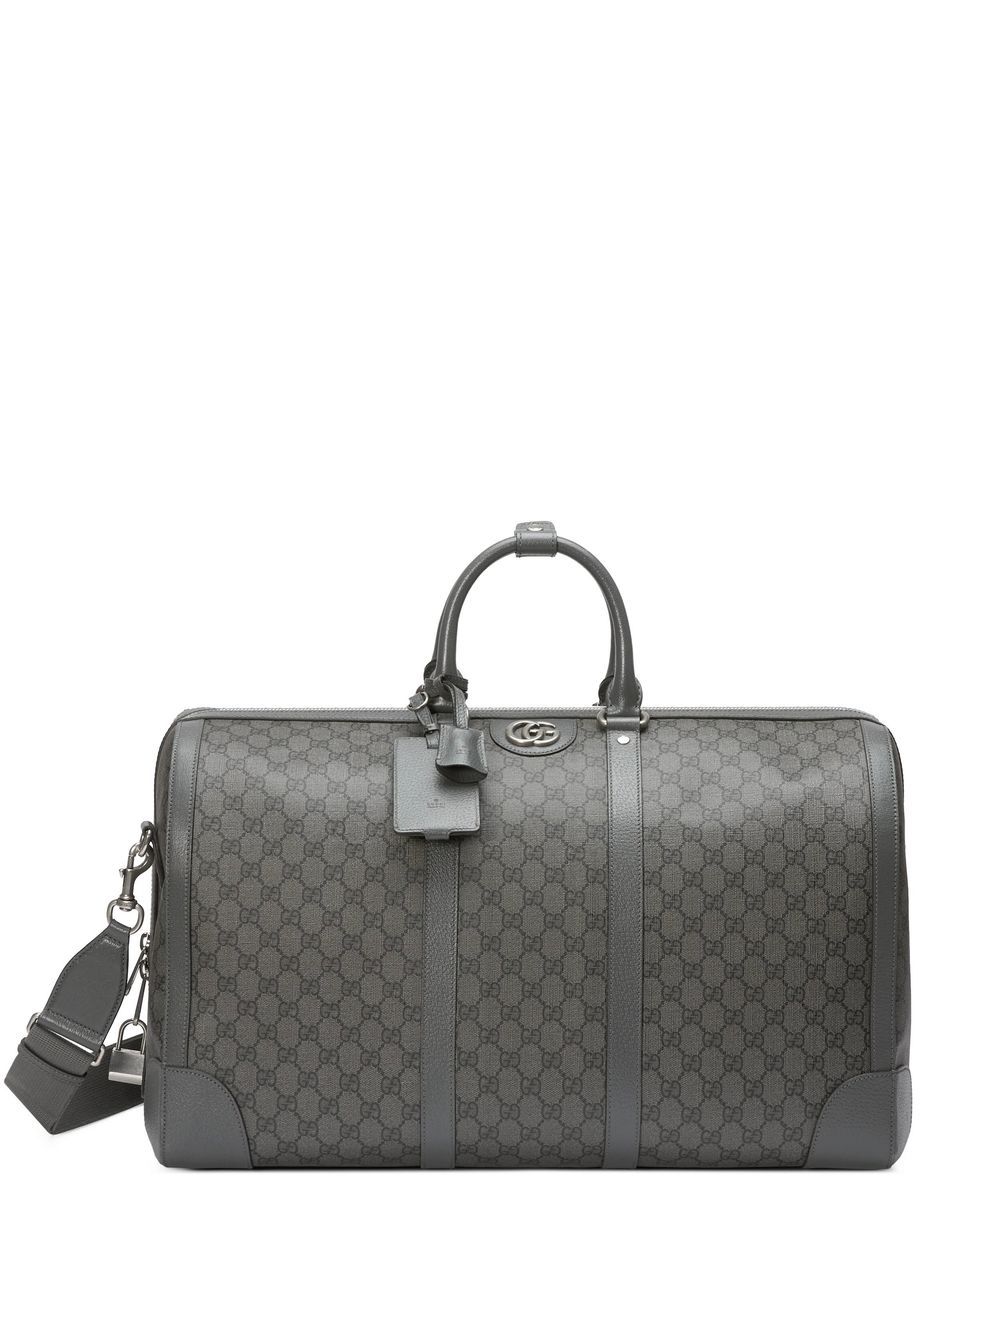 GG Supreme Ophidia Large Carry-on Duffle Single Stripe